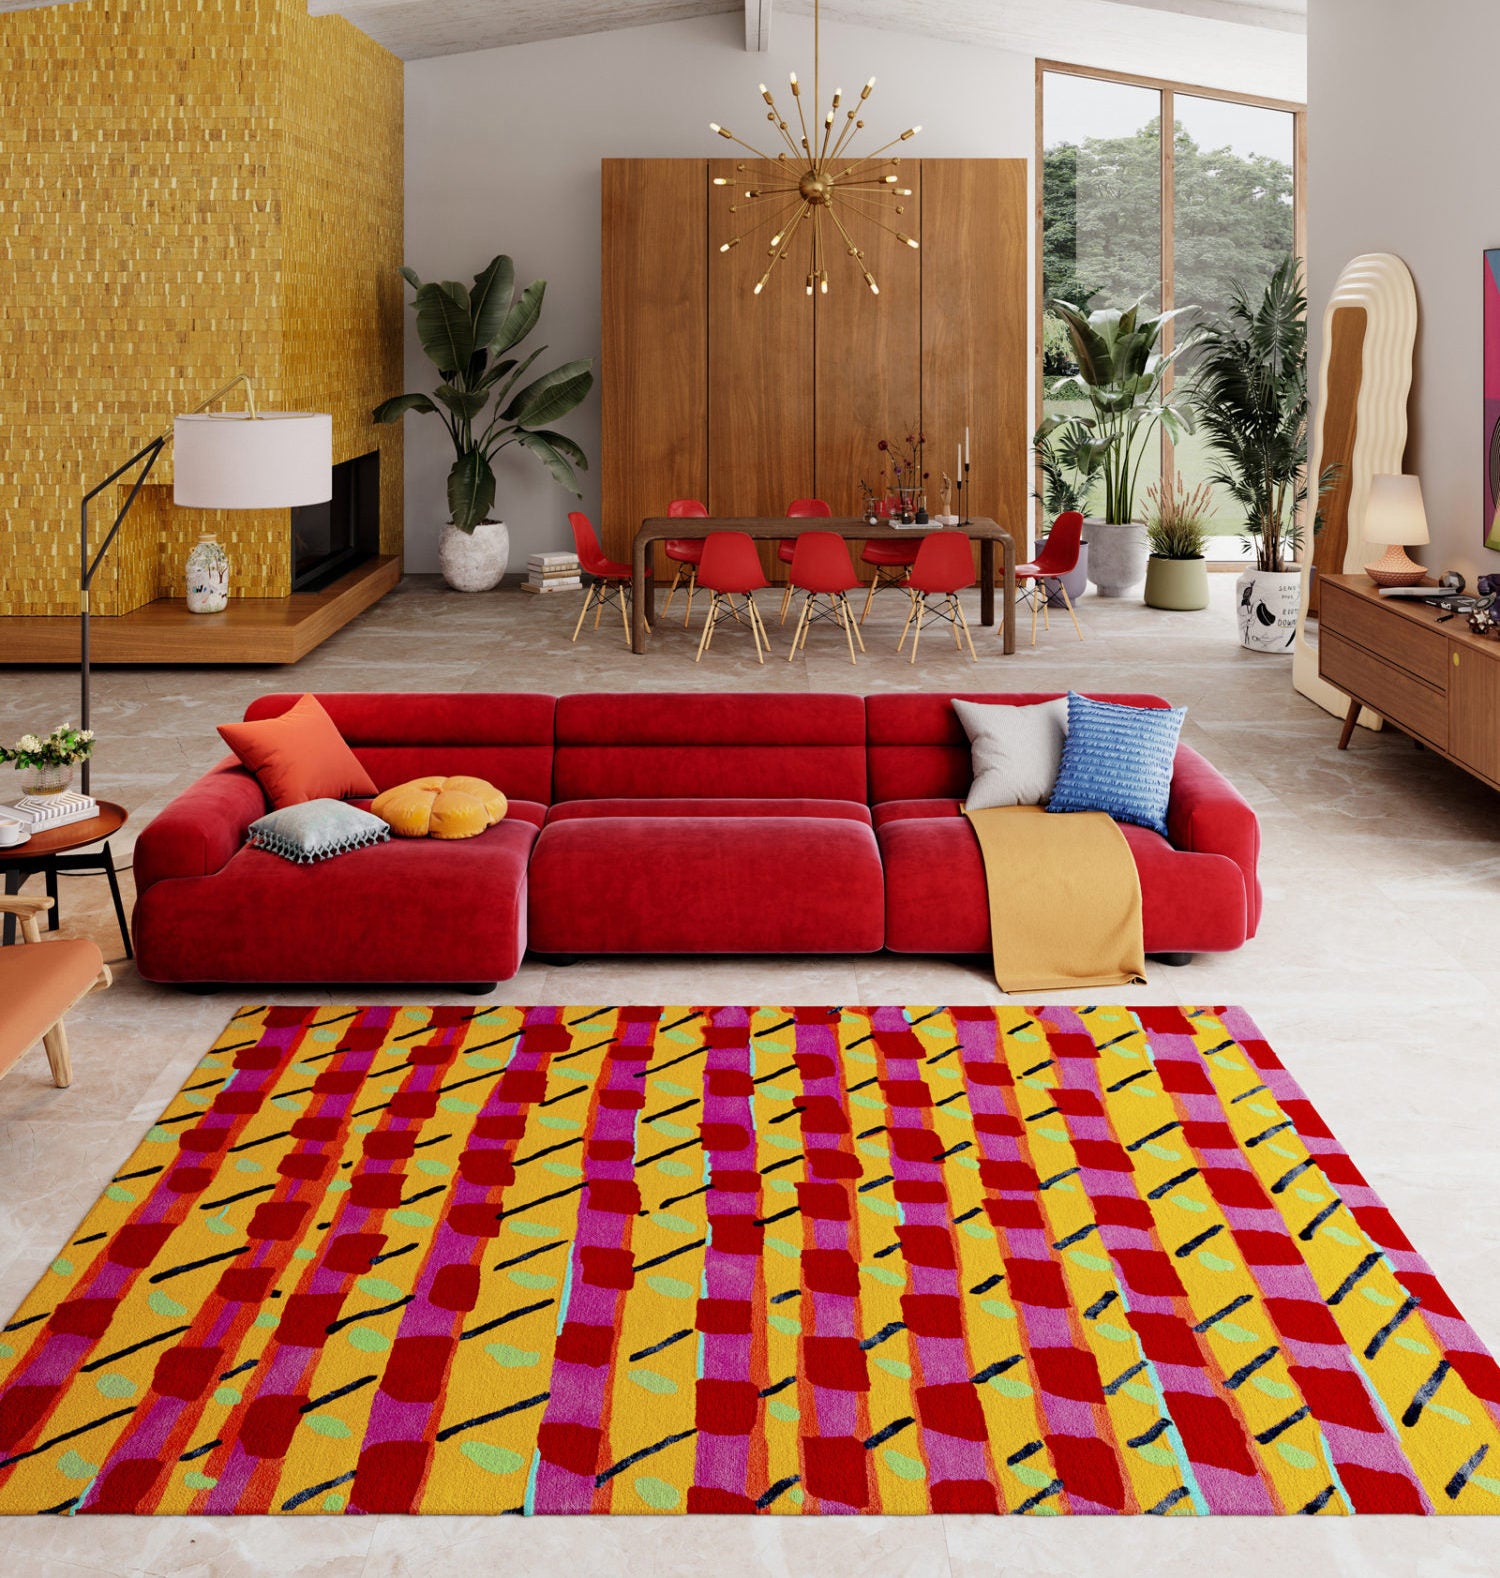 The Roost's Blog on How to Choose a Rug